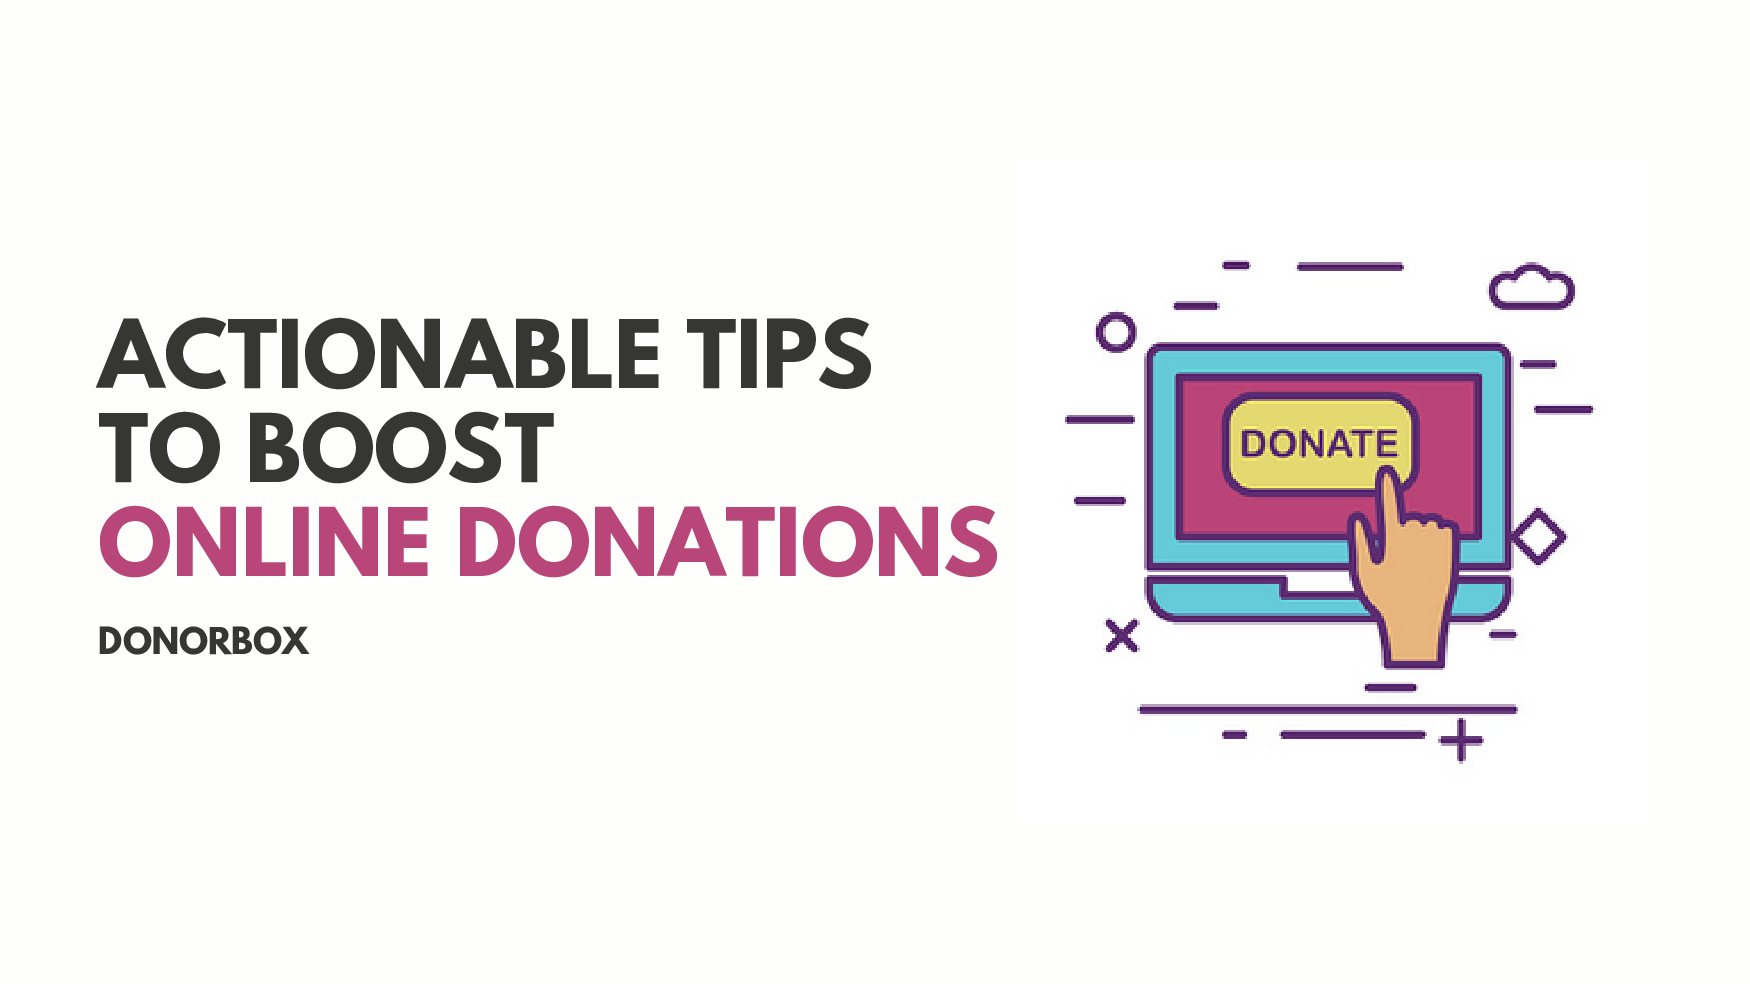 12 Actionable Tips to Boost Online Donations